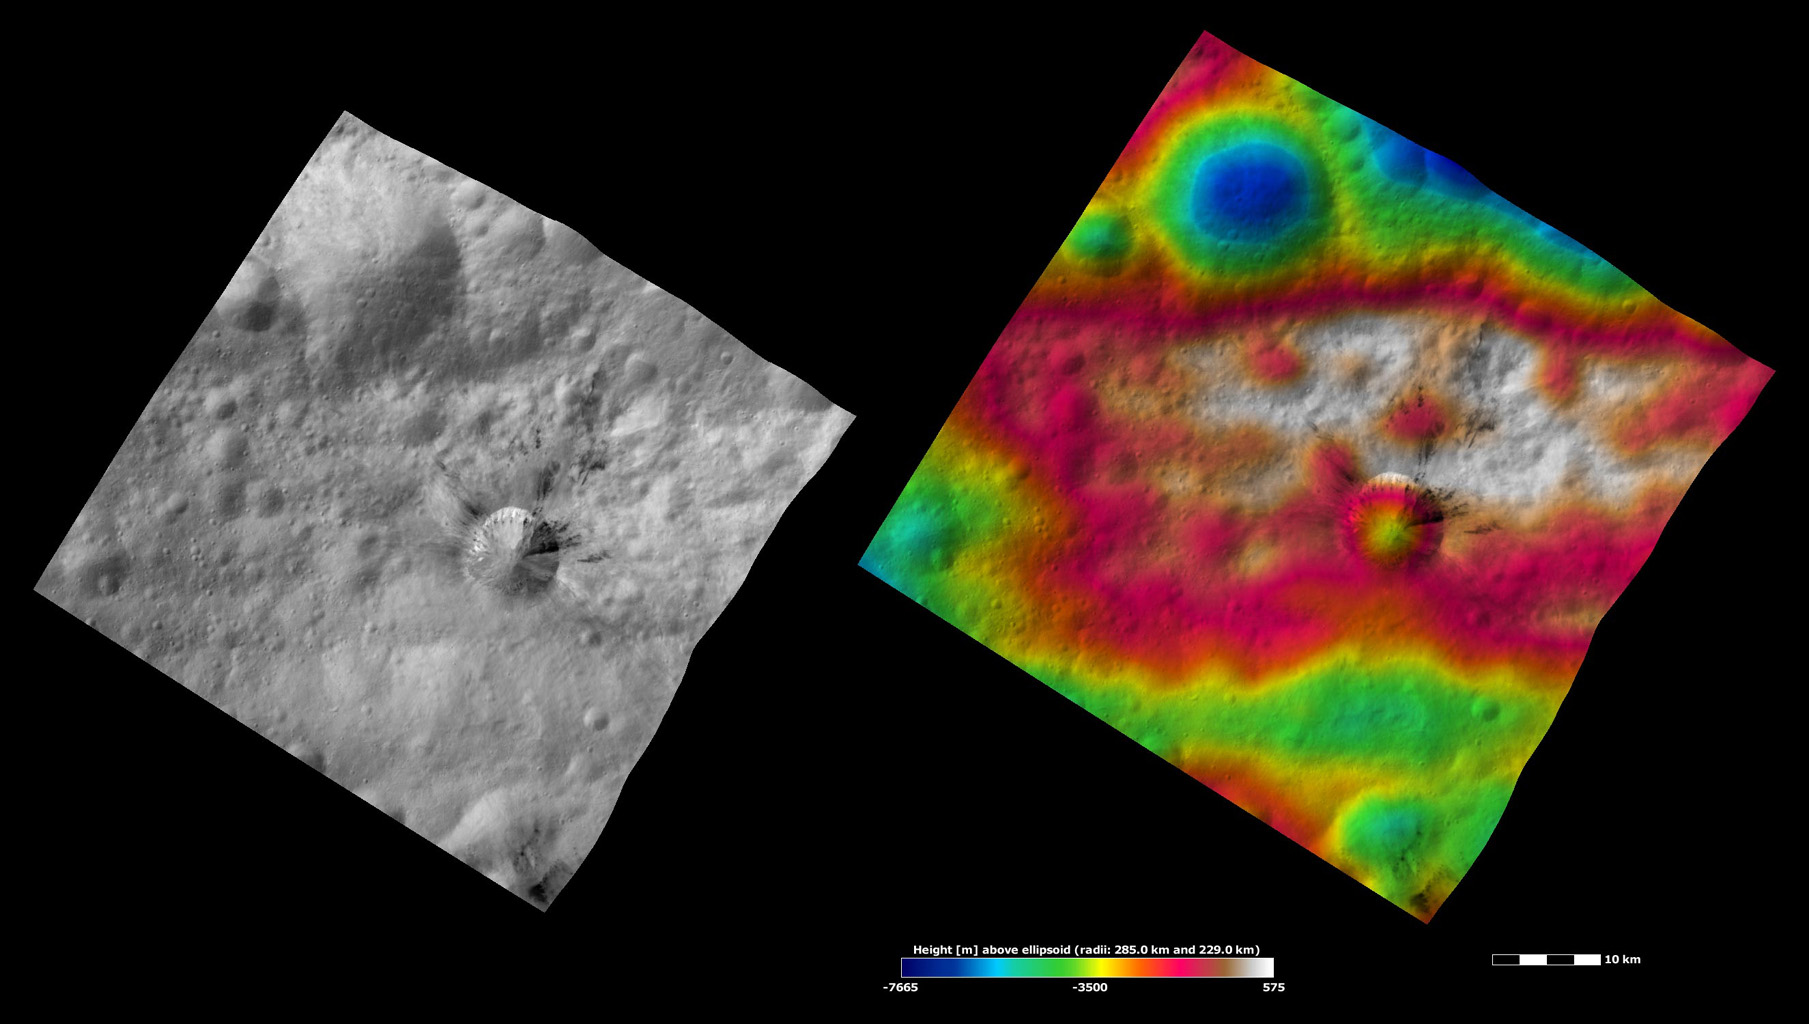 Rubria Crater, Apparent Brightness and Topography Images